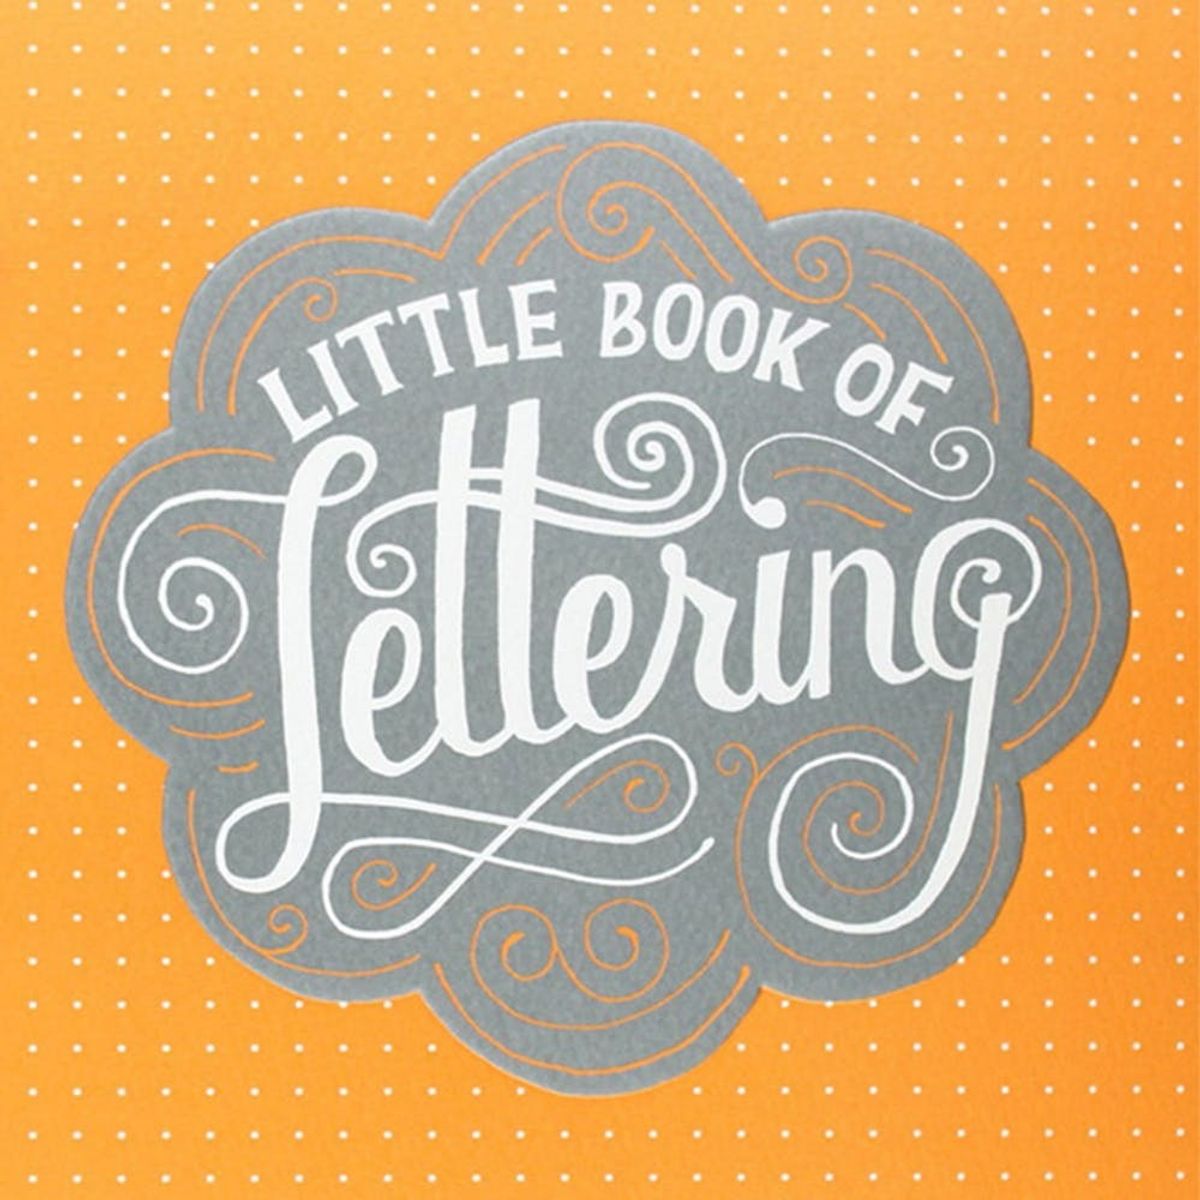 10 Hand-Lettering Books You Need to Check Out